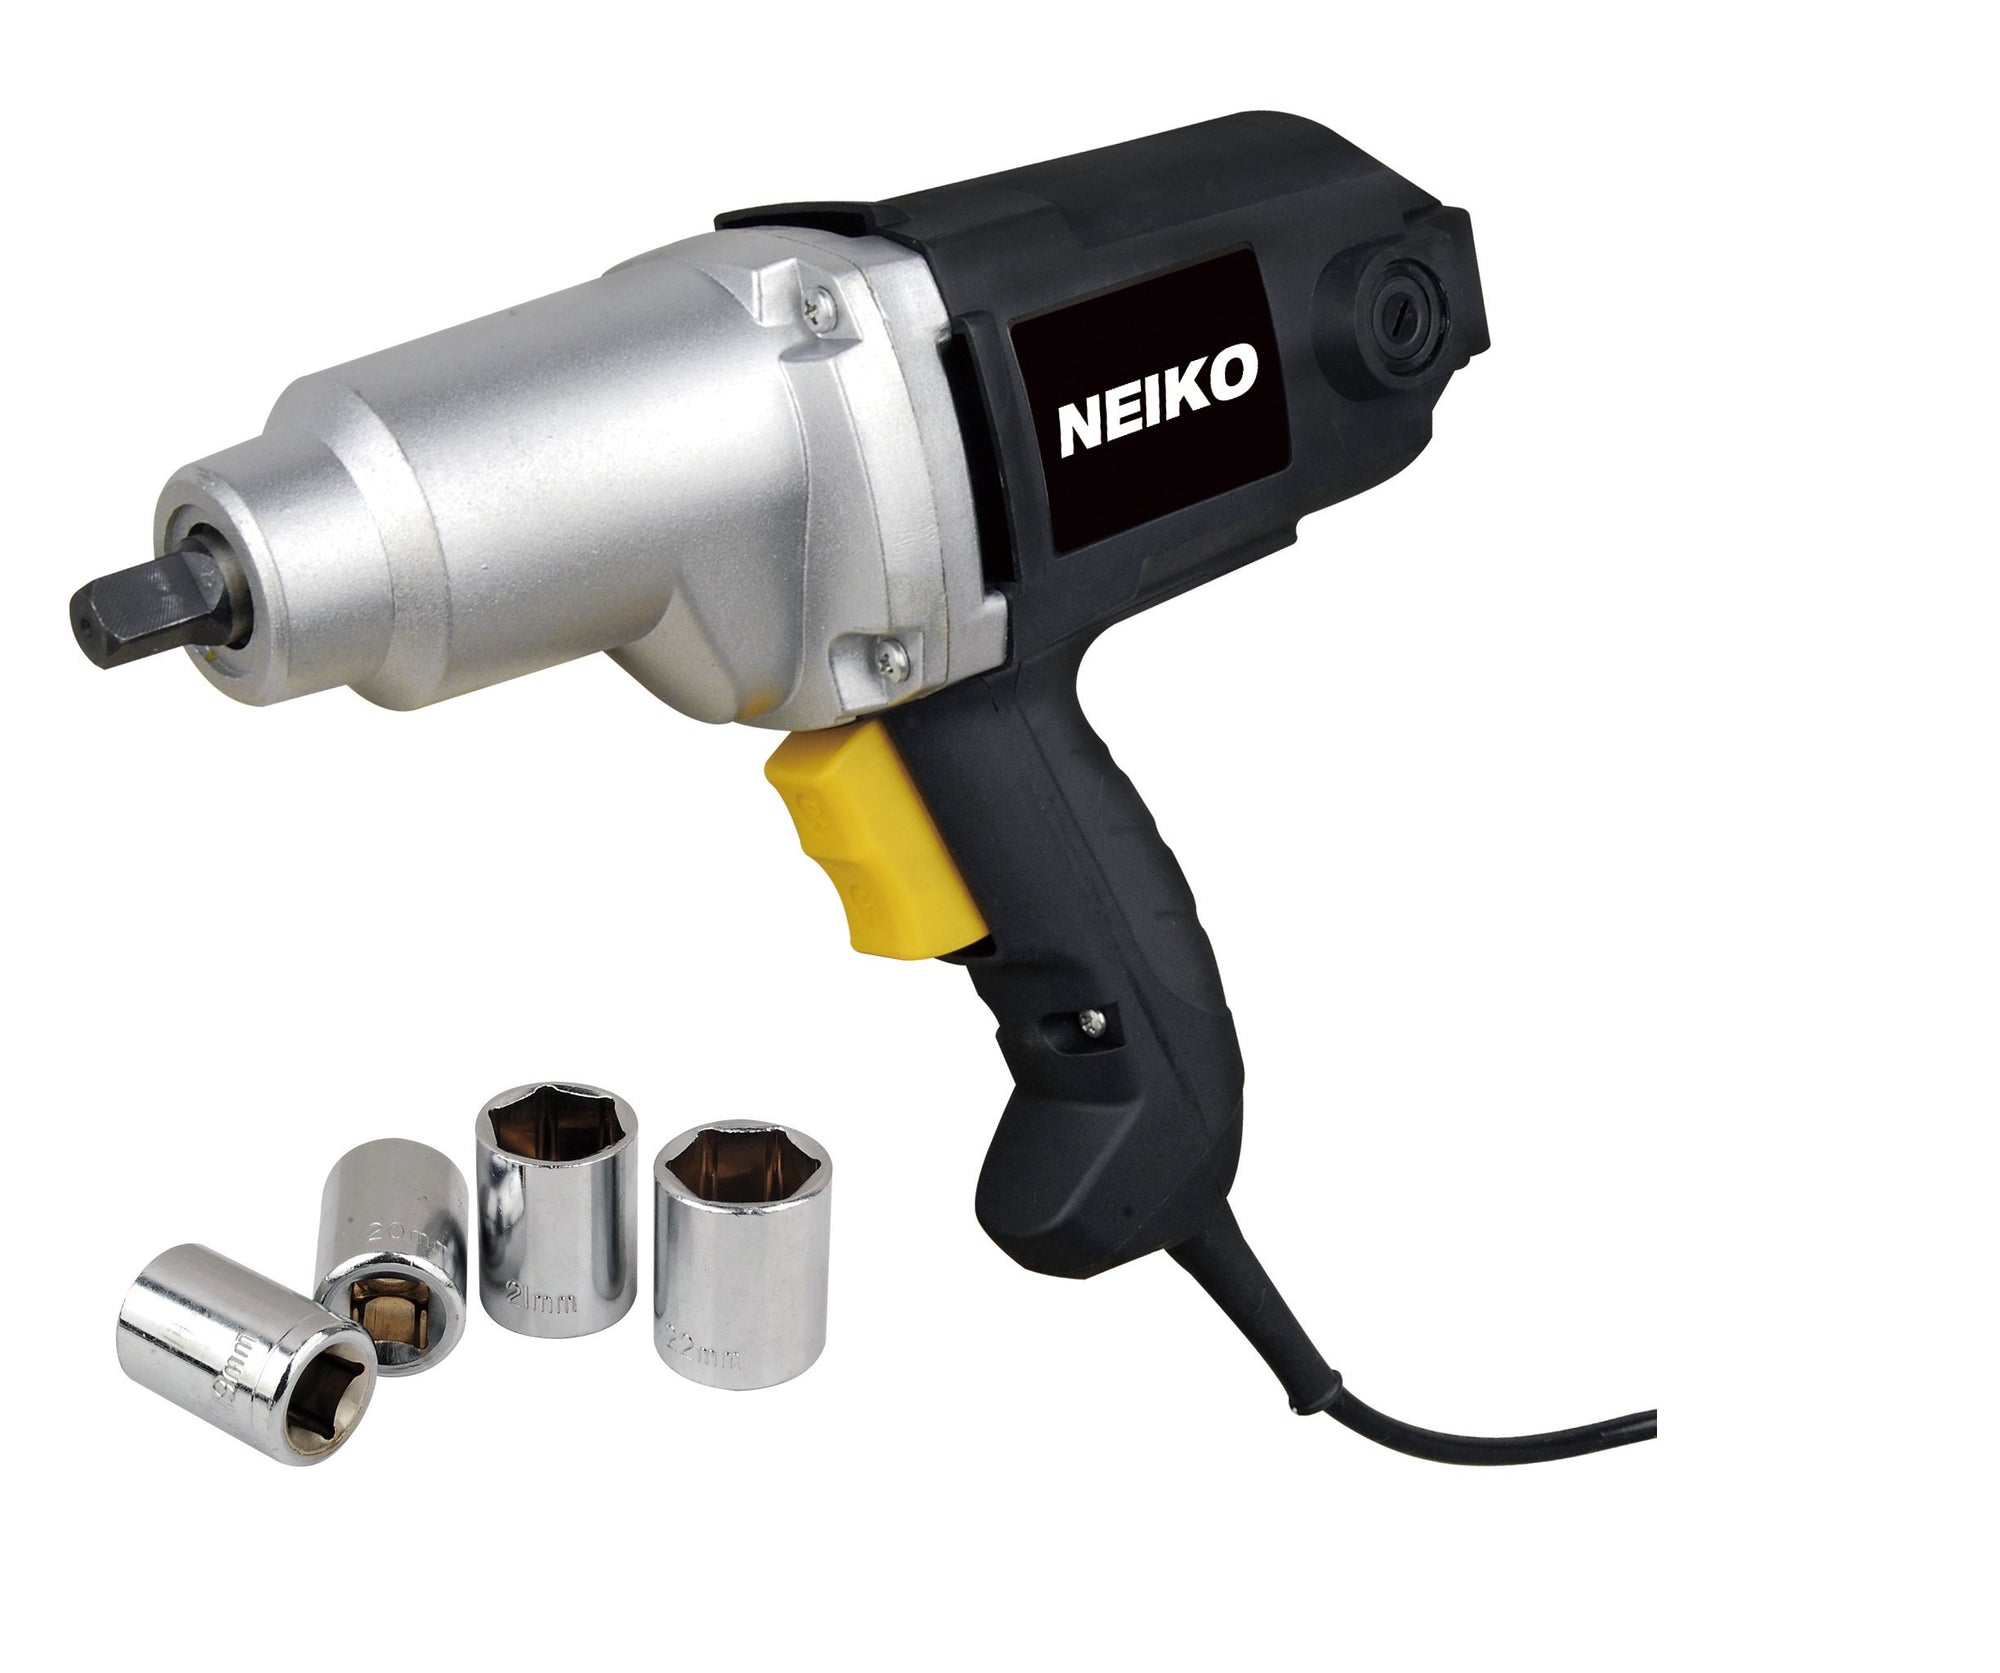 1/2-inch Electric Impact Wrench Kit with 4 Metric Sockets | 9mm-22mm